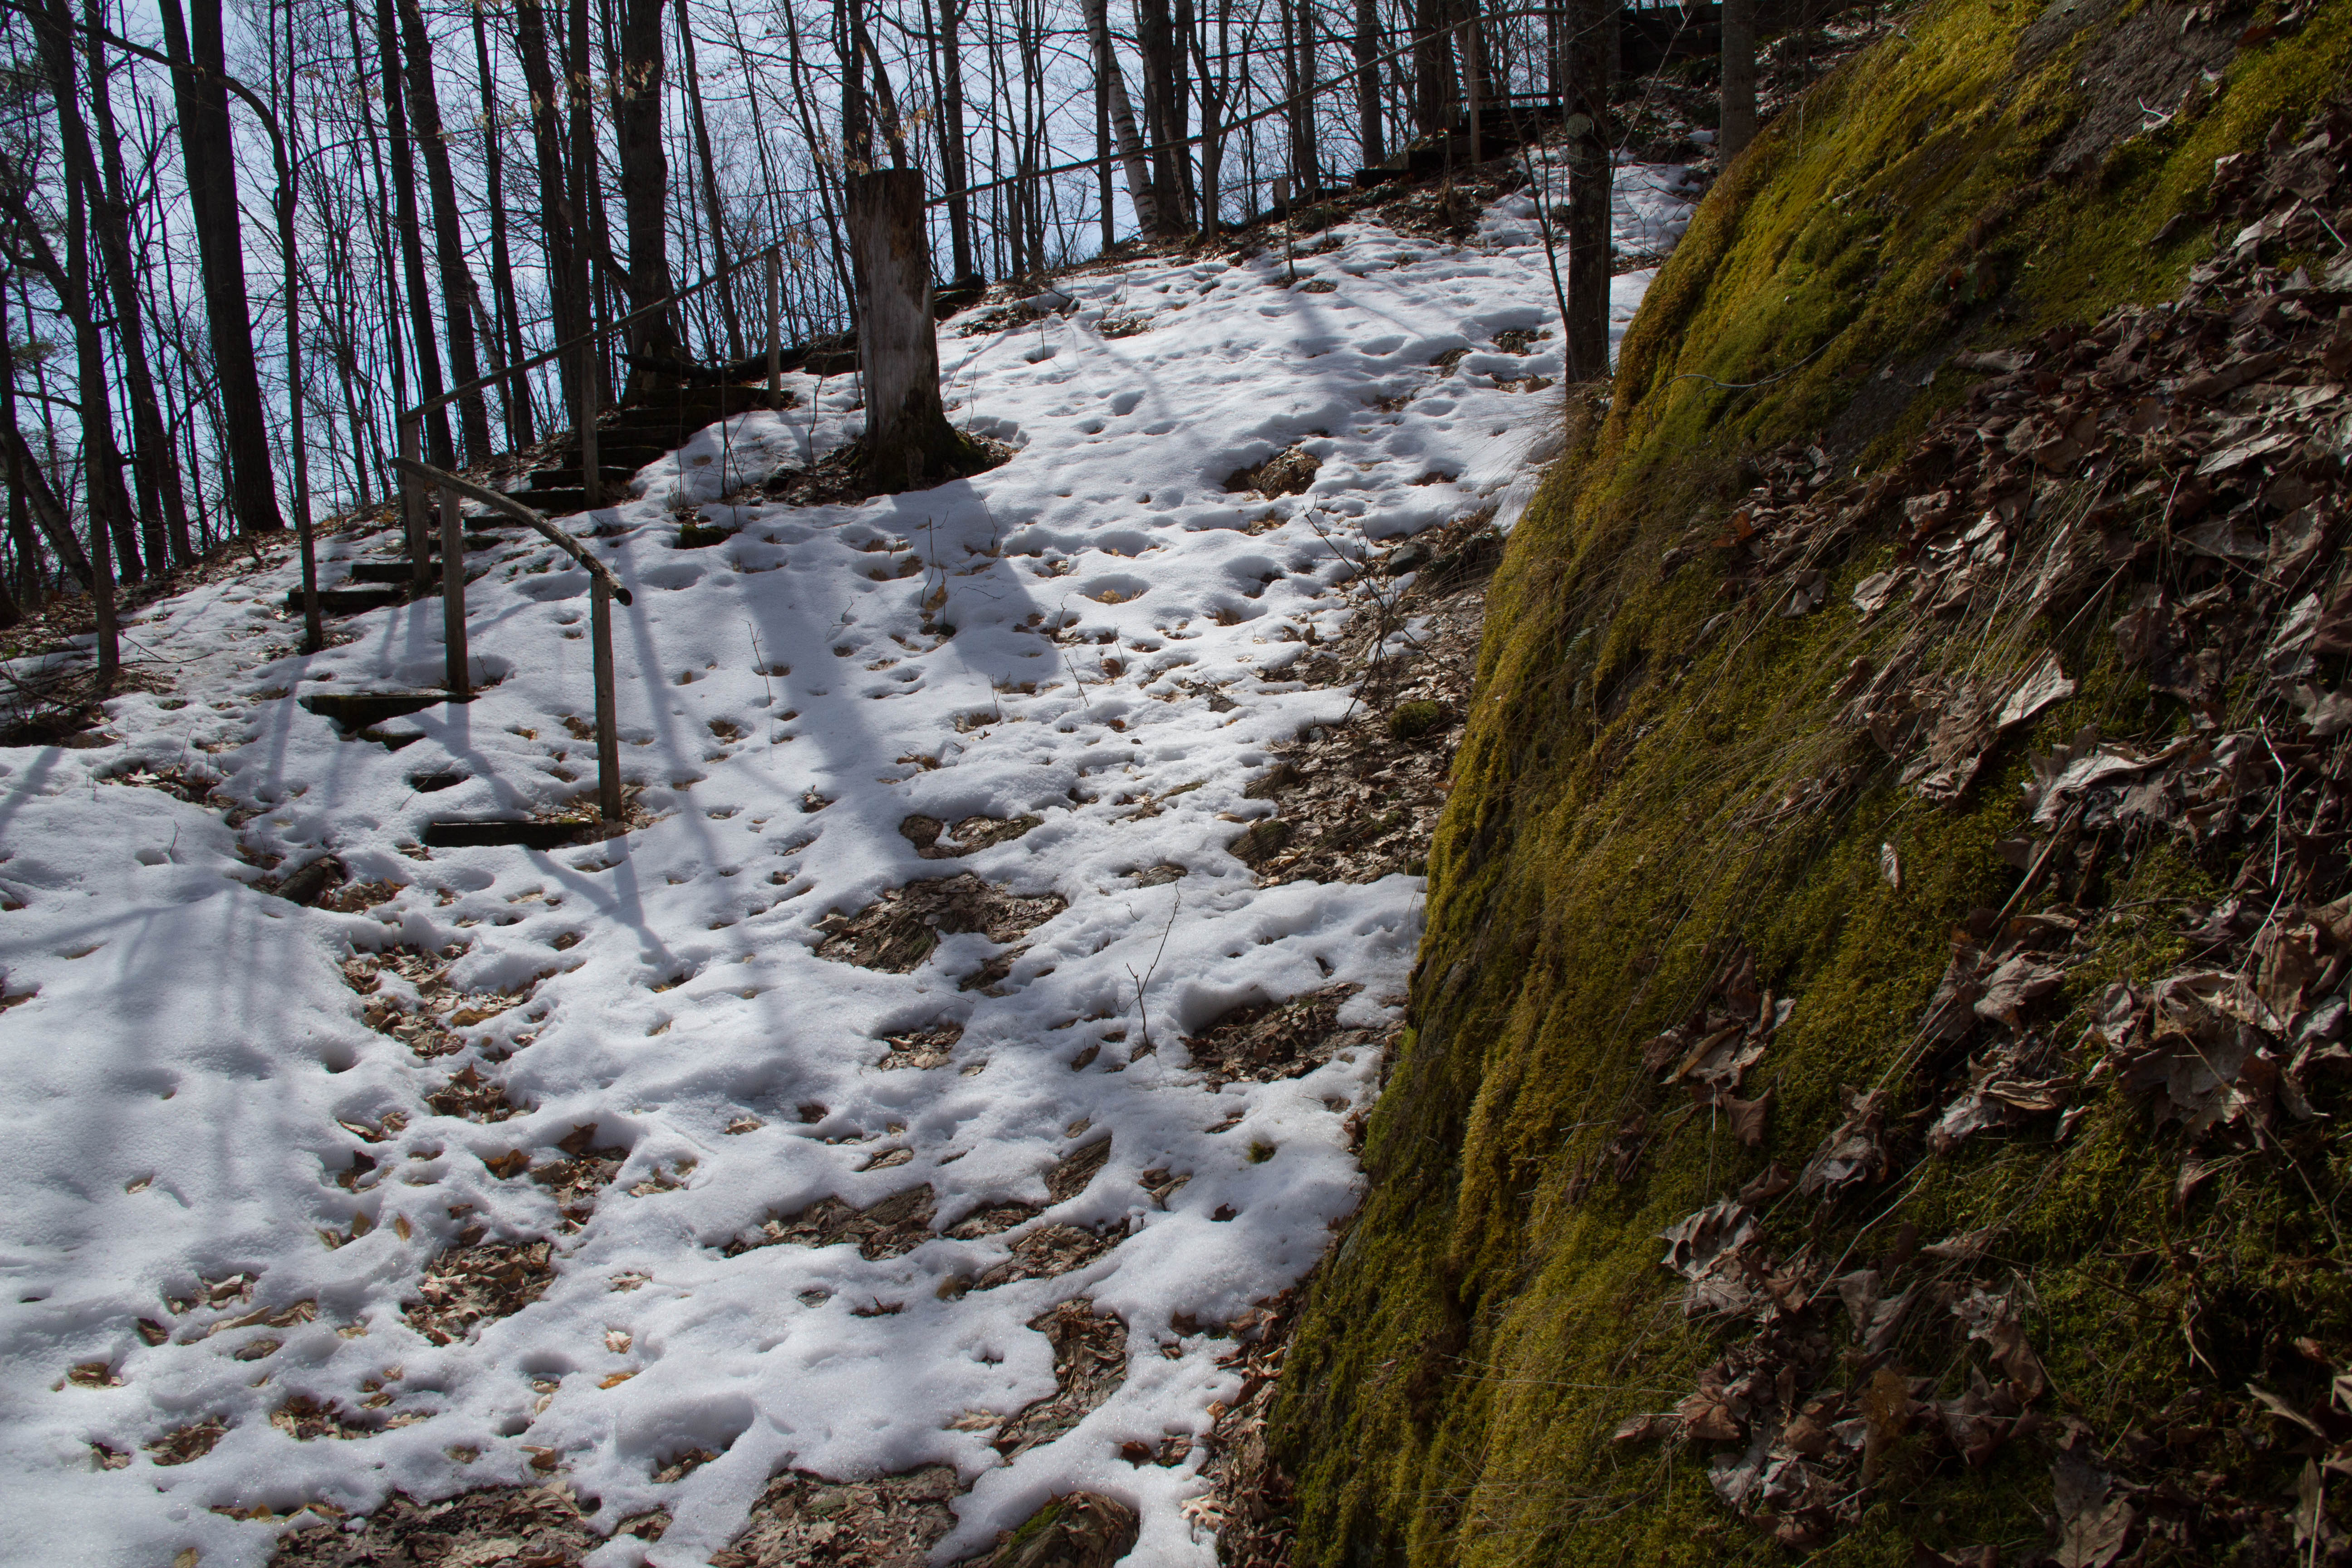 The snow-free spots on this hillside are warmer. Why?